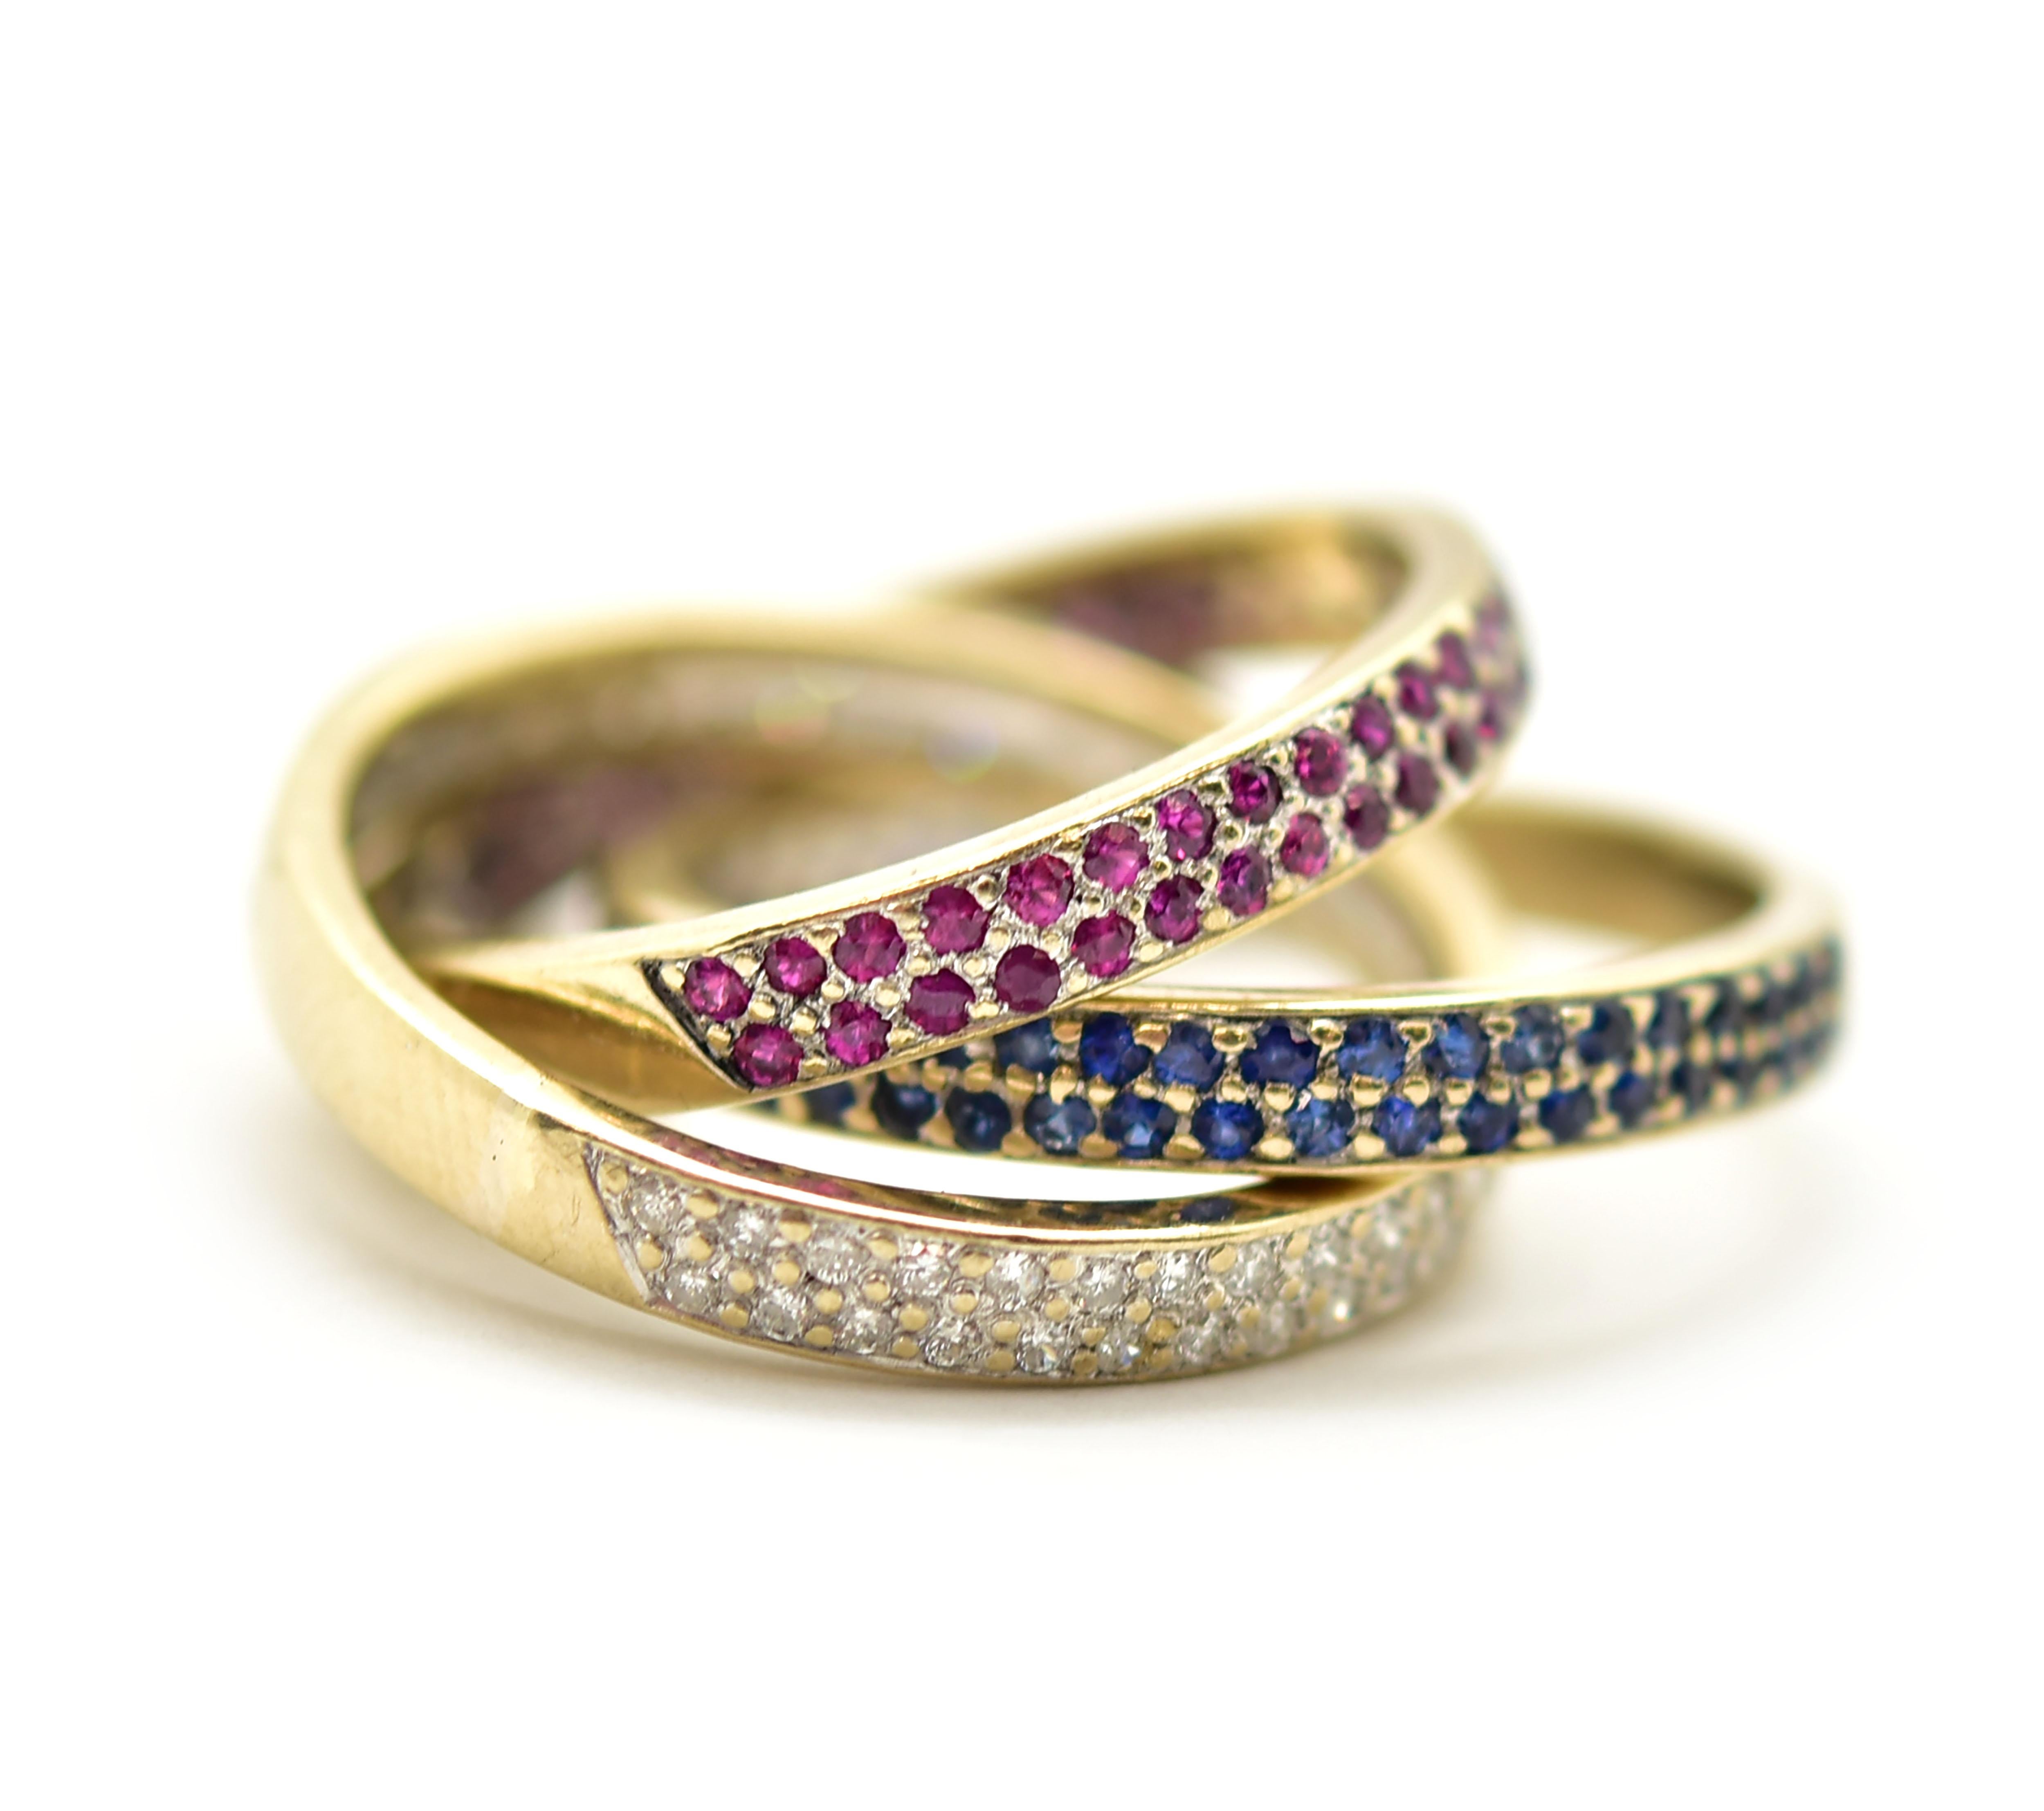 This piece of jewelry showcases extreme creativity combined with beautiful gemstones. The rings are attached to each other to create a rolling effect. Each ring is either ruby, sapphire or diamonds, each set in two rows.  The first ring is designed